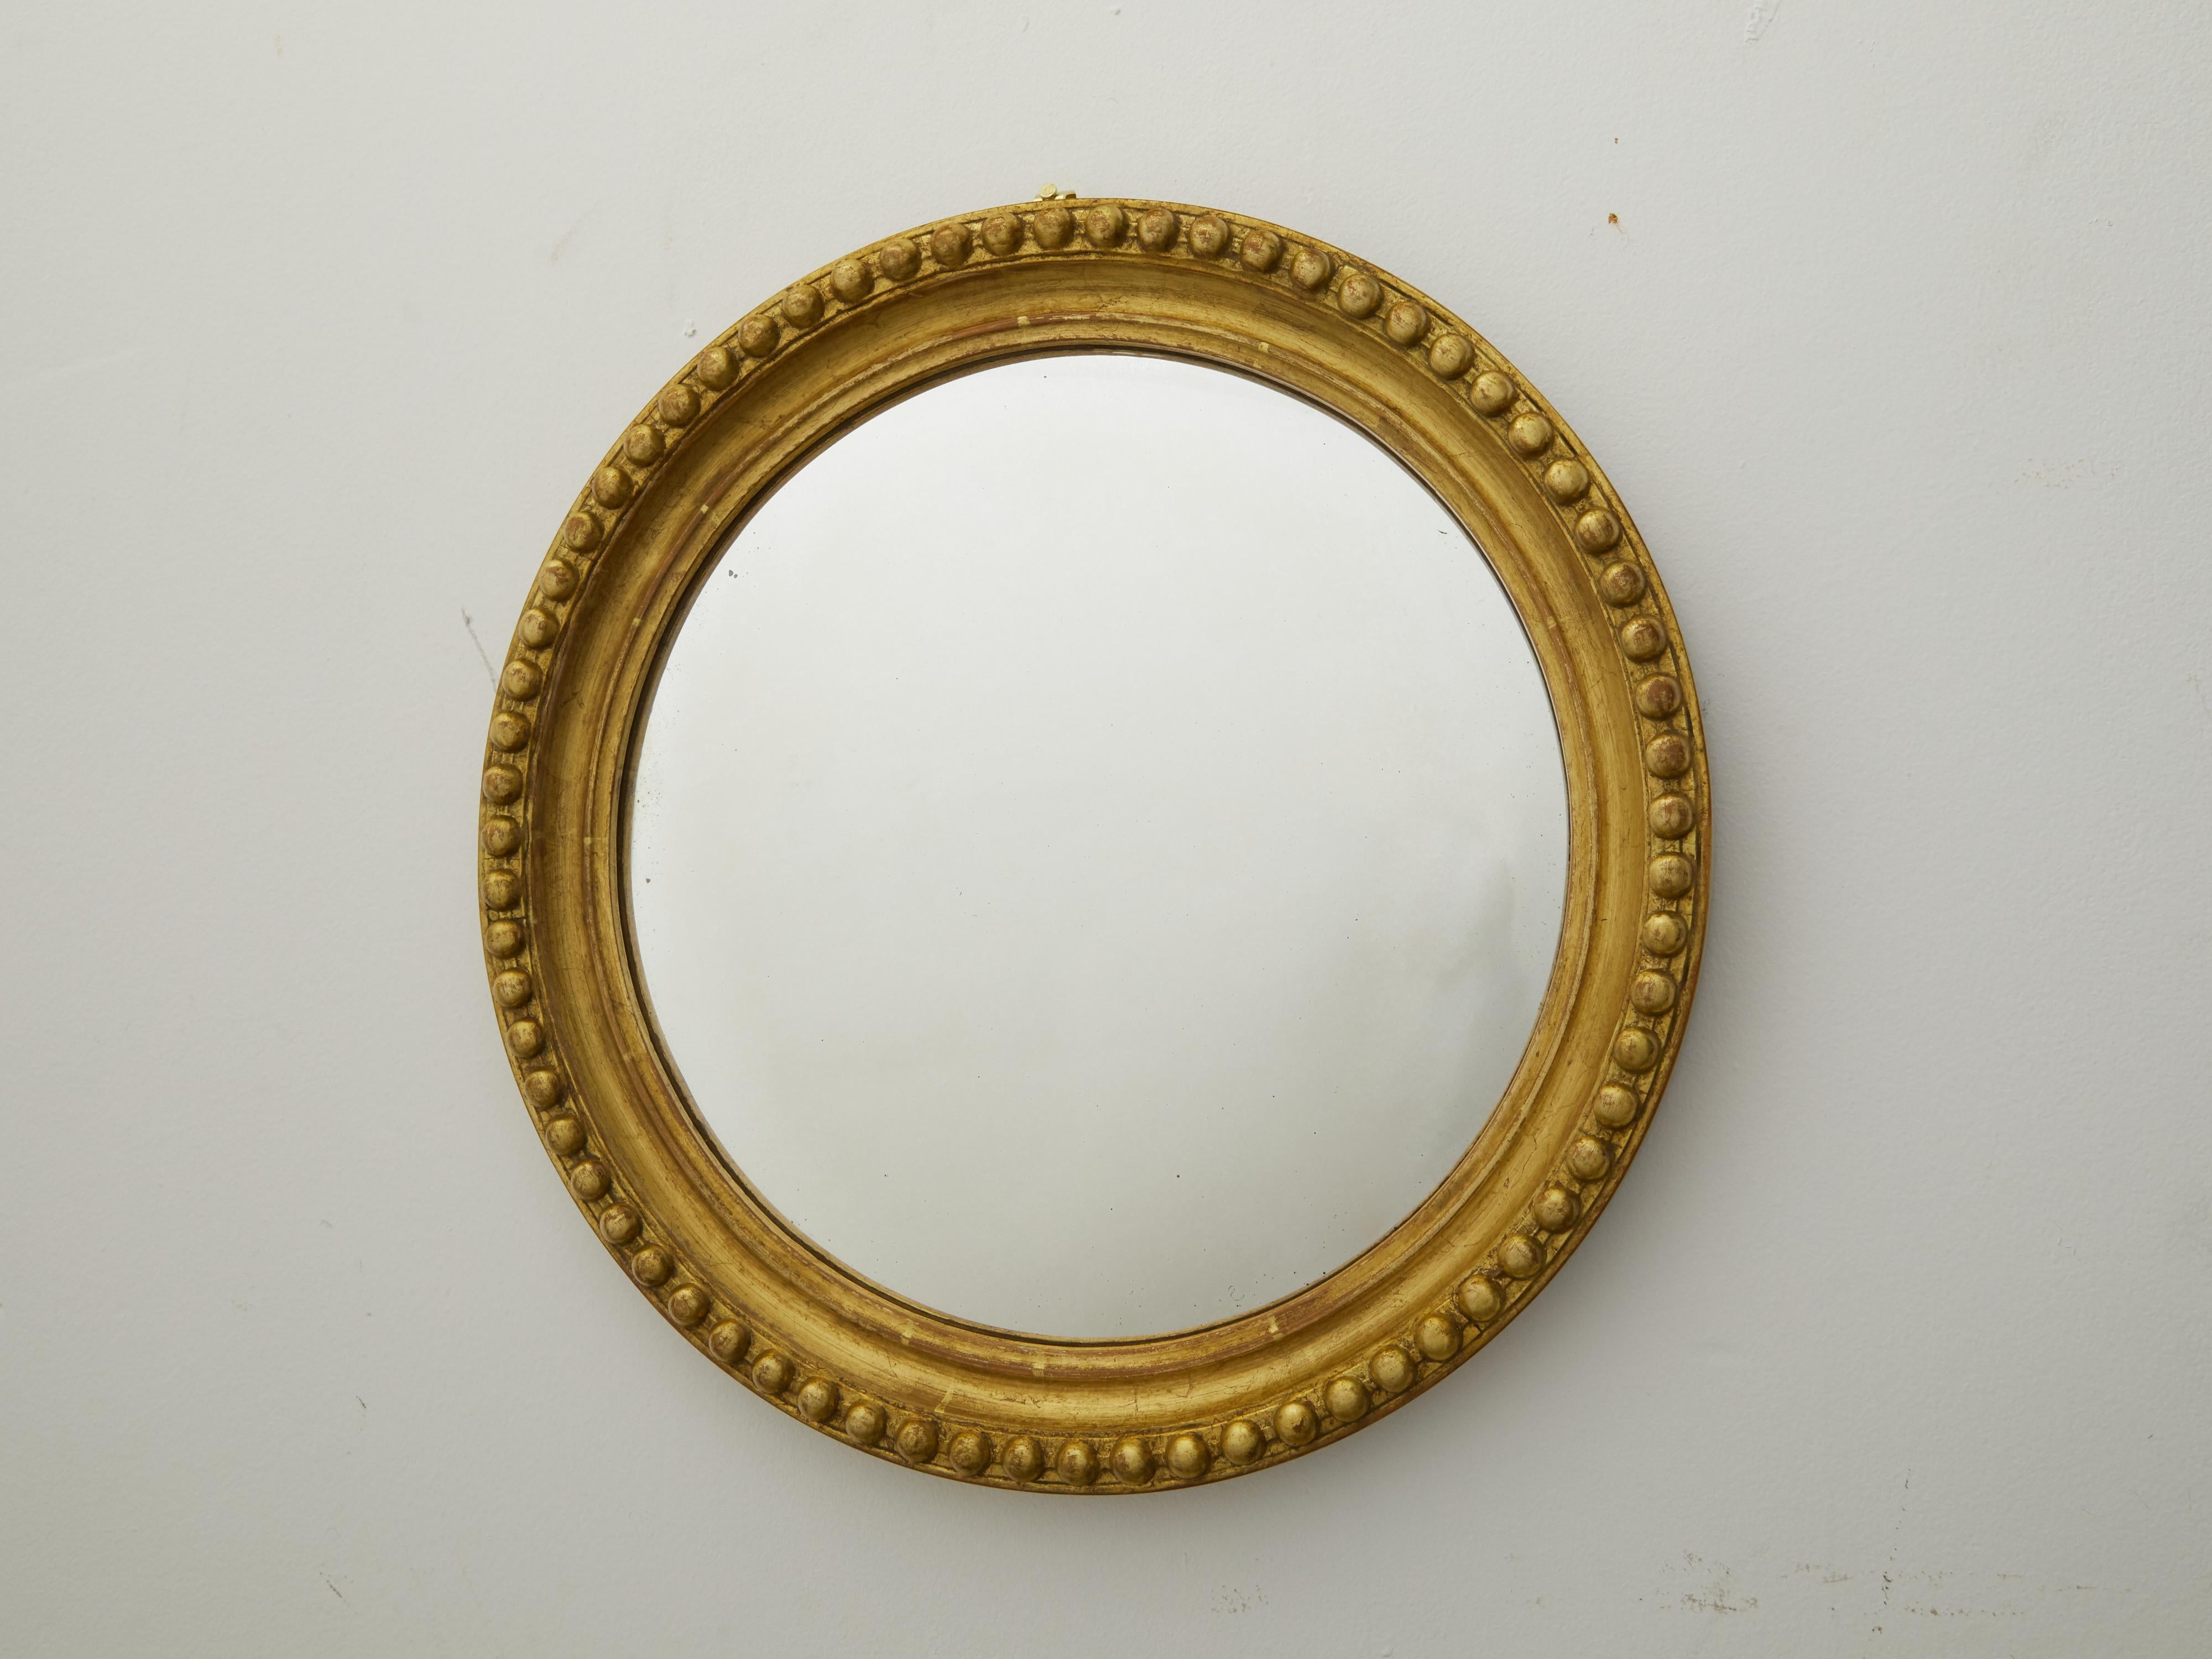 An English vintage giltwood convex mirror from the mid 20th century, with bead motifs. Created in England during the midcentury period, this mirror features a circular giltwood frame adorned with large beaded motifs, surrounding a convex mirror